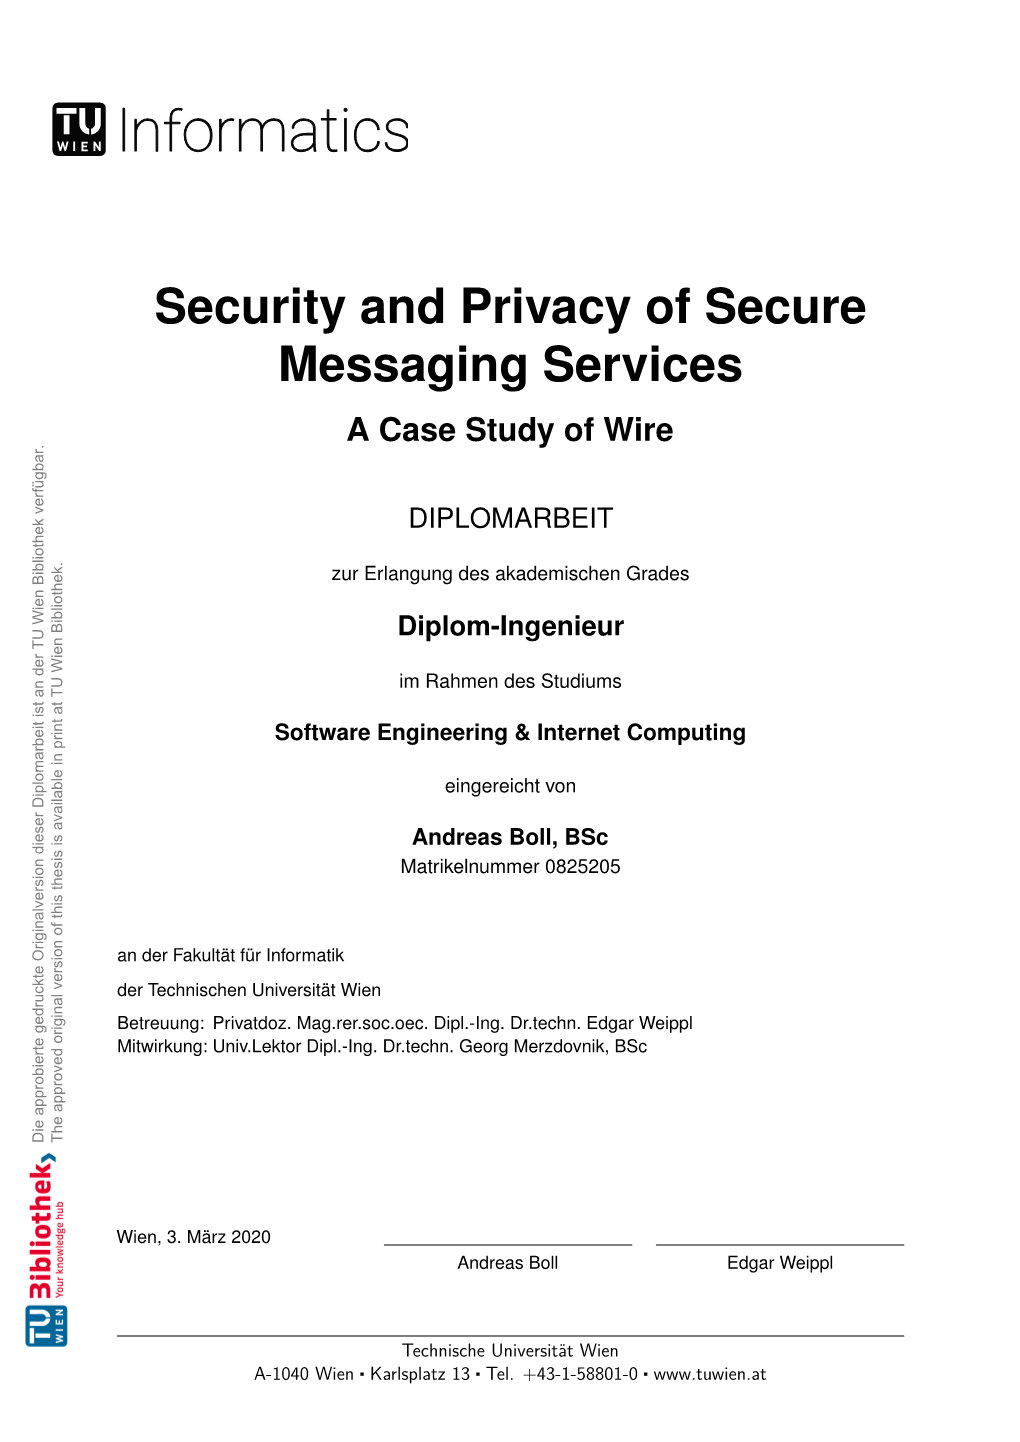 Security and Privacy of Secure Messaging Services